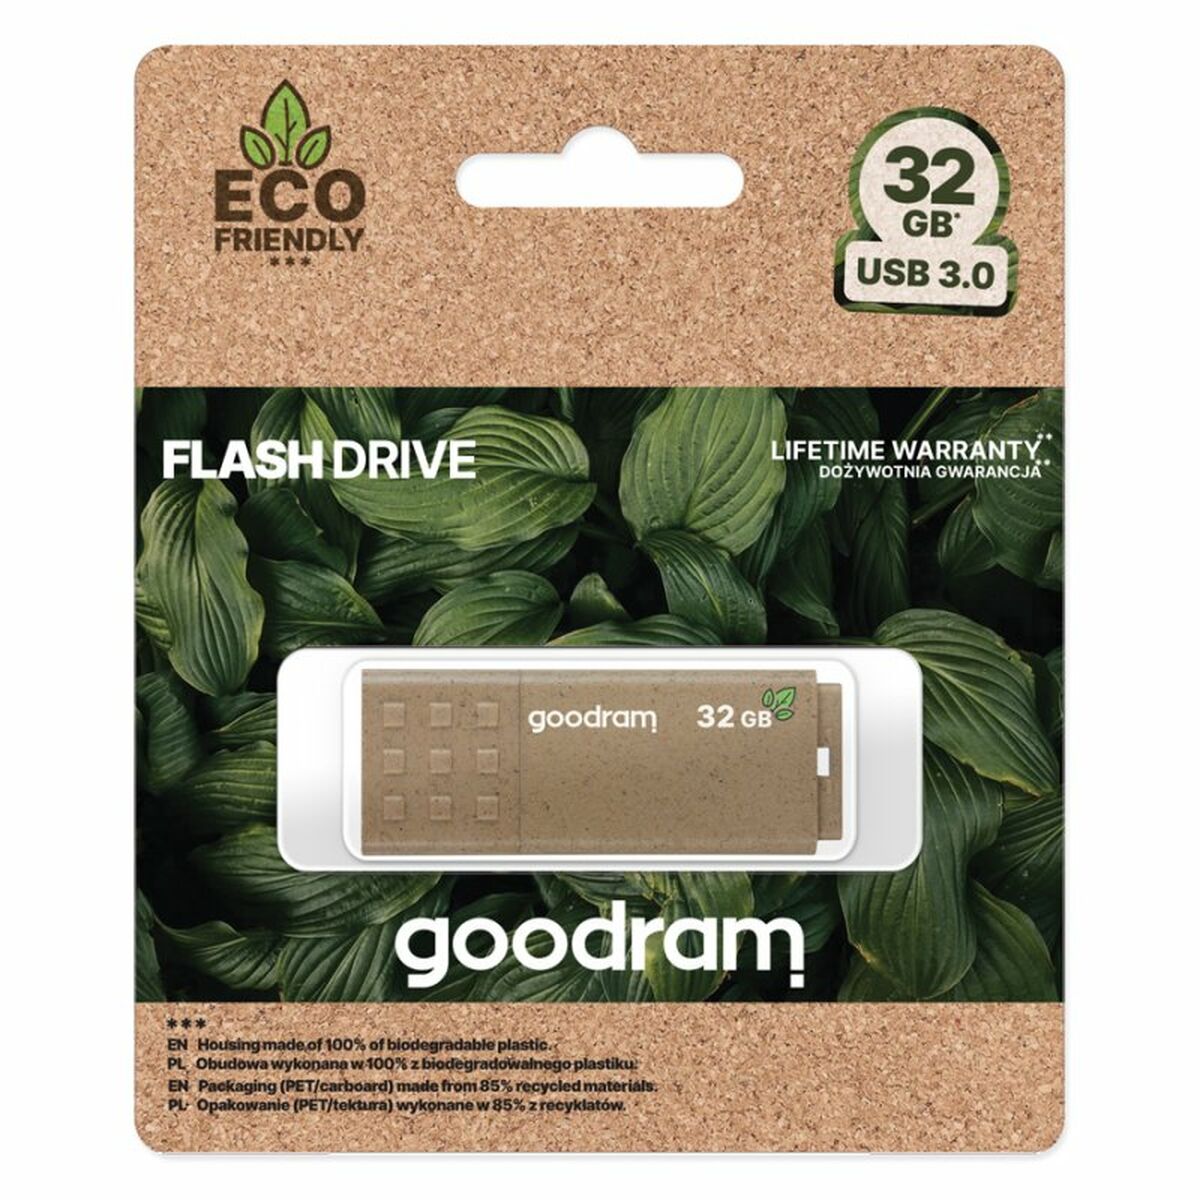 USB stick GoodRam UME3 Eco Friendly 32 GB, GoodRam, Computing, Data storage, usb-stick-goodram-ume3-eco-friendly-32-gb, Brand_GoodRam, category-reference-2609, category-reference-2803, category-reference-2817, category-reference-t-19685, category-reference-t-19909, category-reference-t-21355, computers / components, Condition_NEW, Price_20 - 50, Teleworking, RiotNook